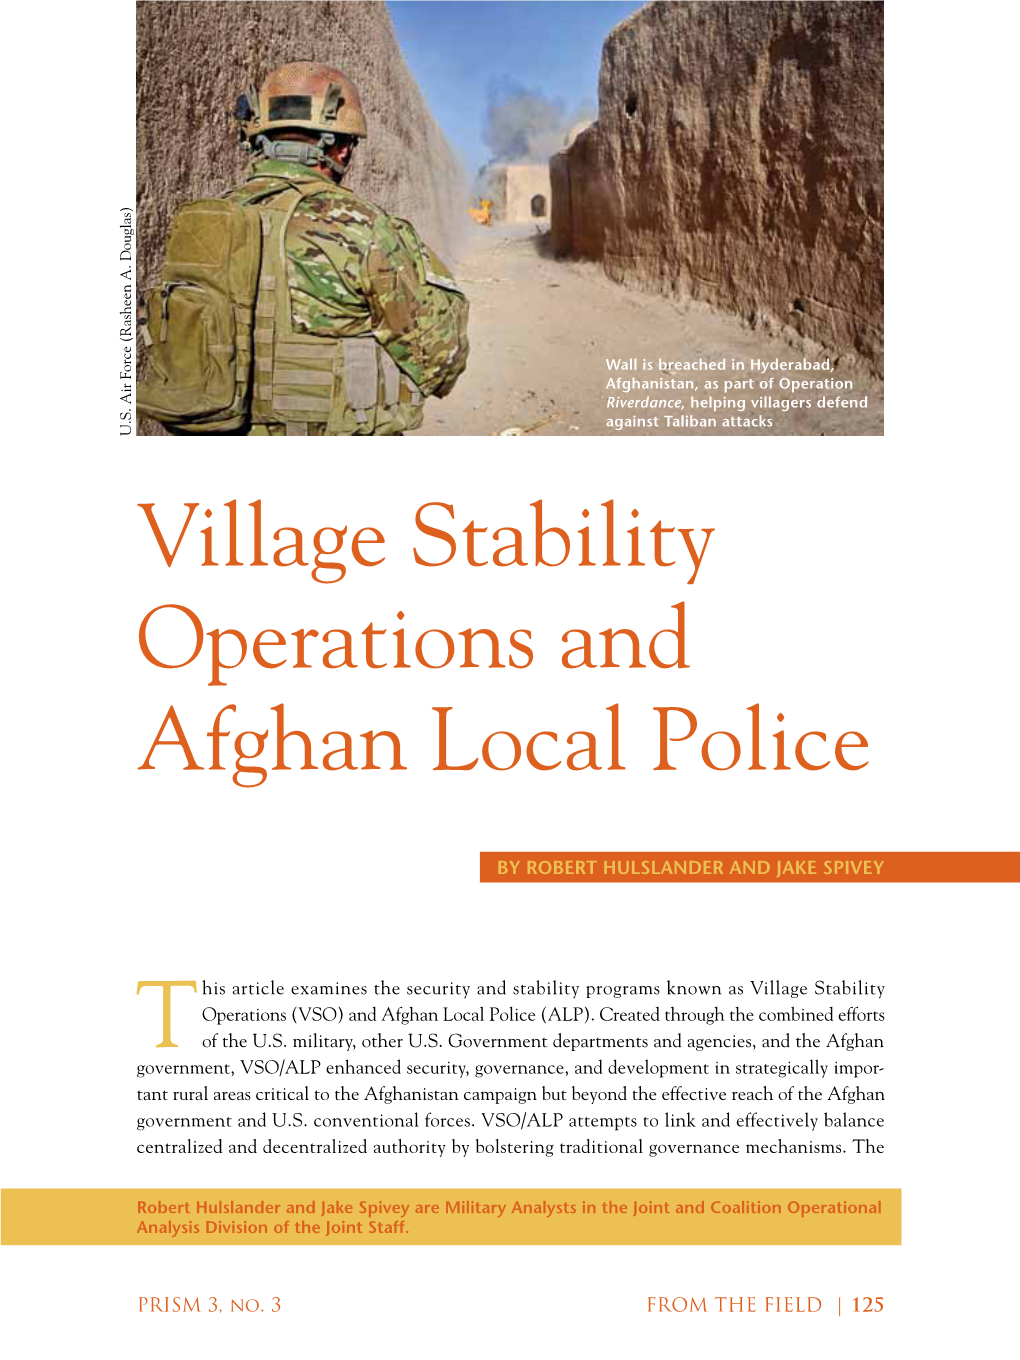 Village Stability Operations and Afghan Local Police